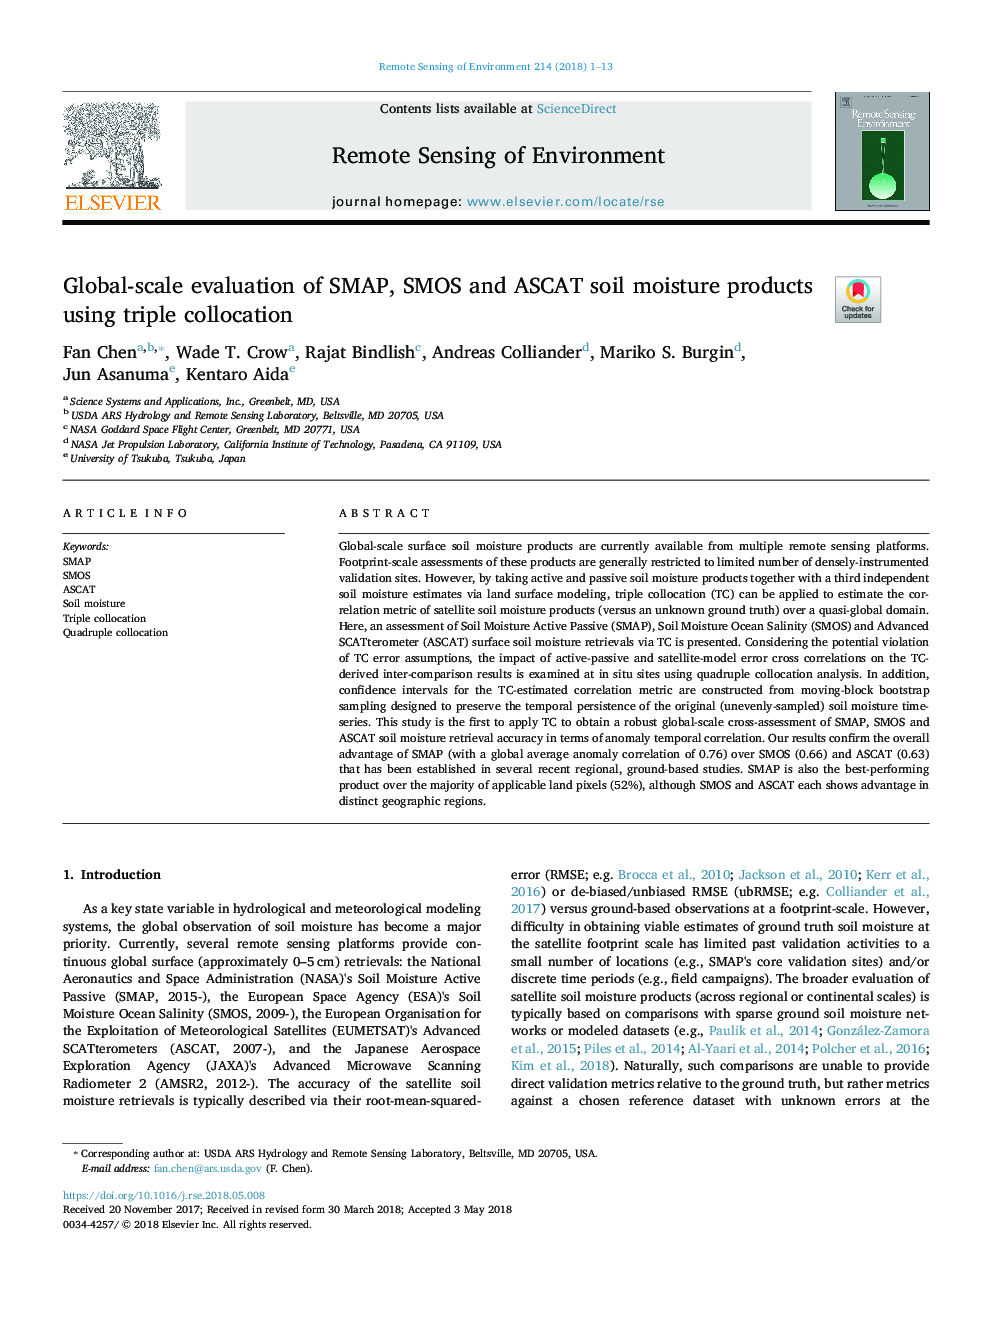 Global-scale evaluation of SMAP, SMOS and ASCAT soil moisture products using triple collocation